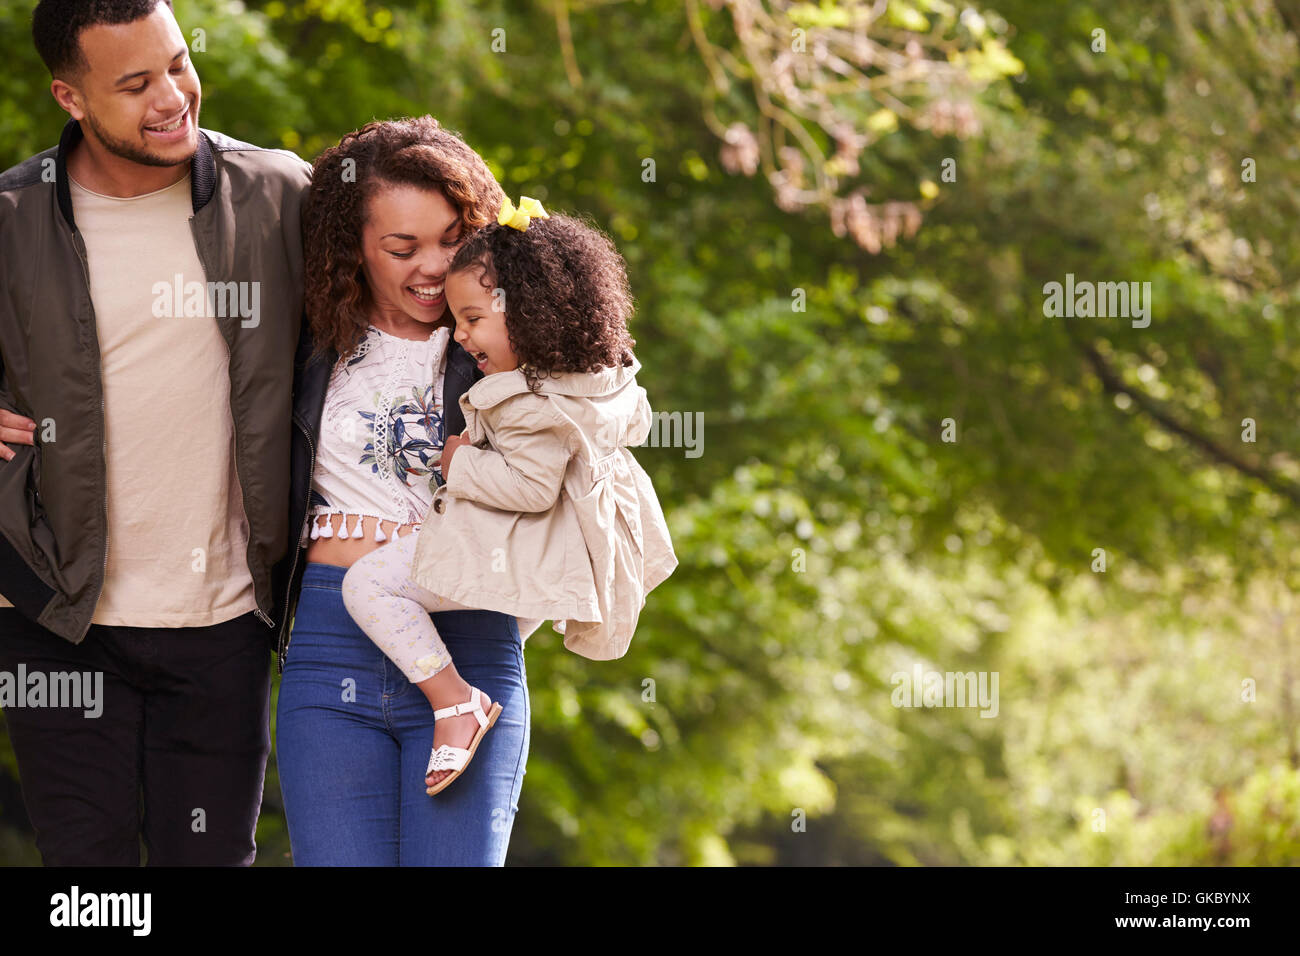 Family of three on a walk, mother holding child, close up Stock Photo